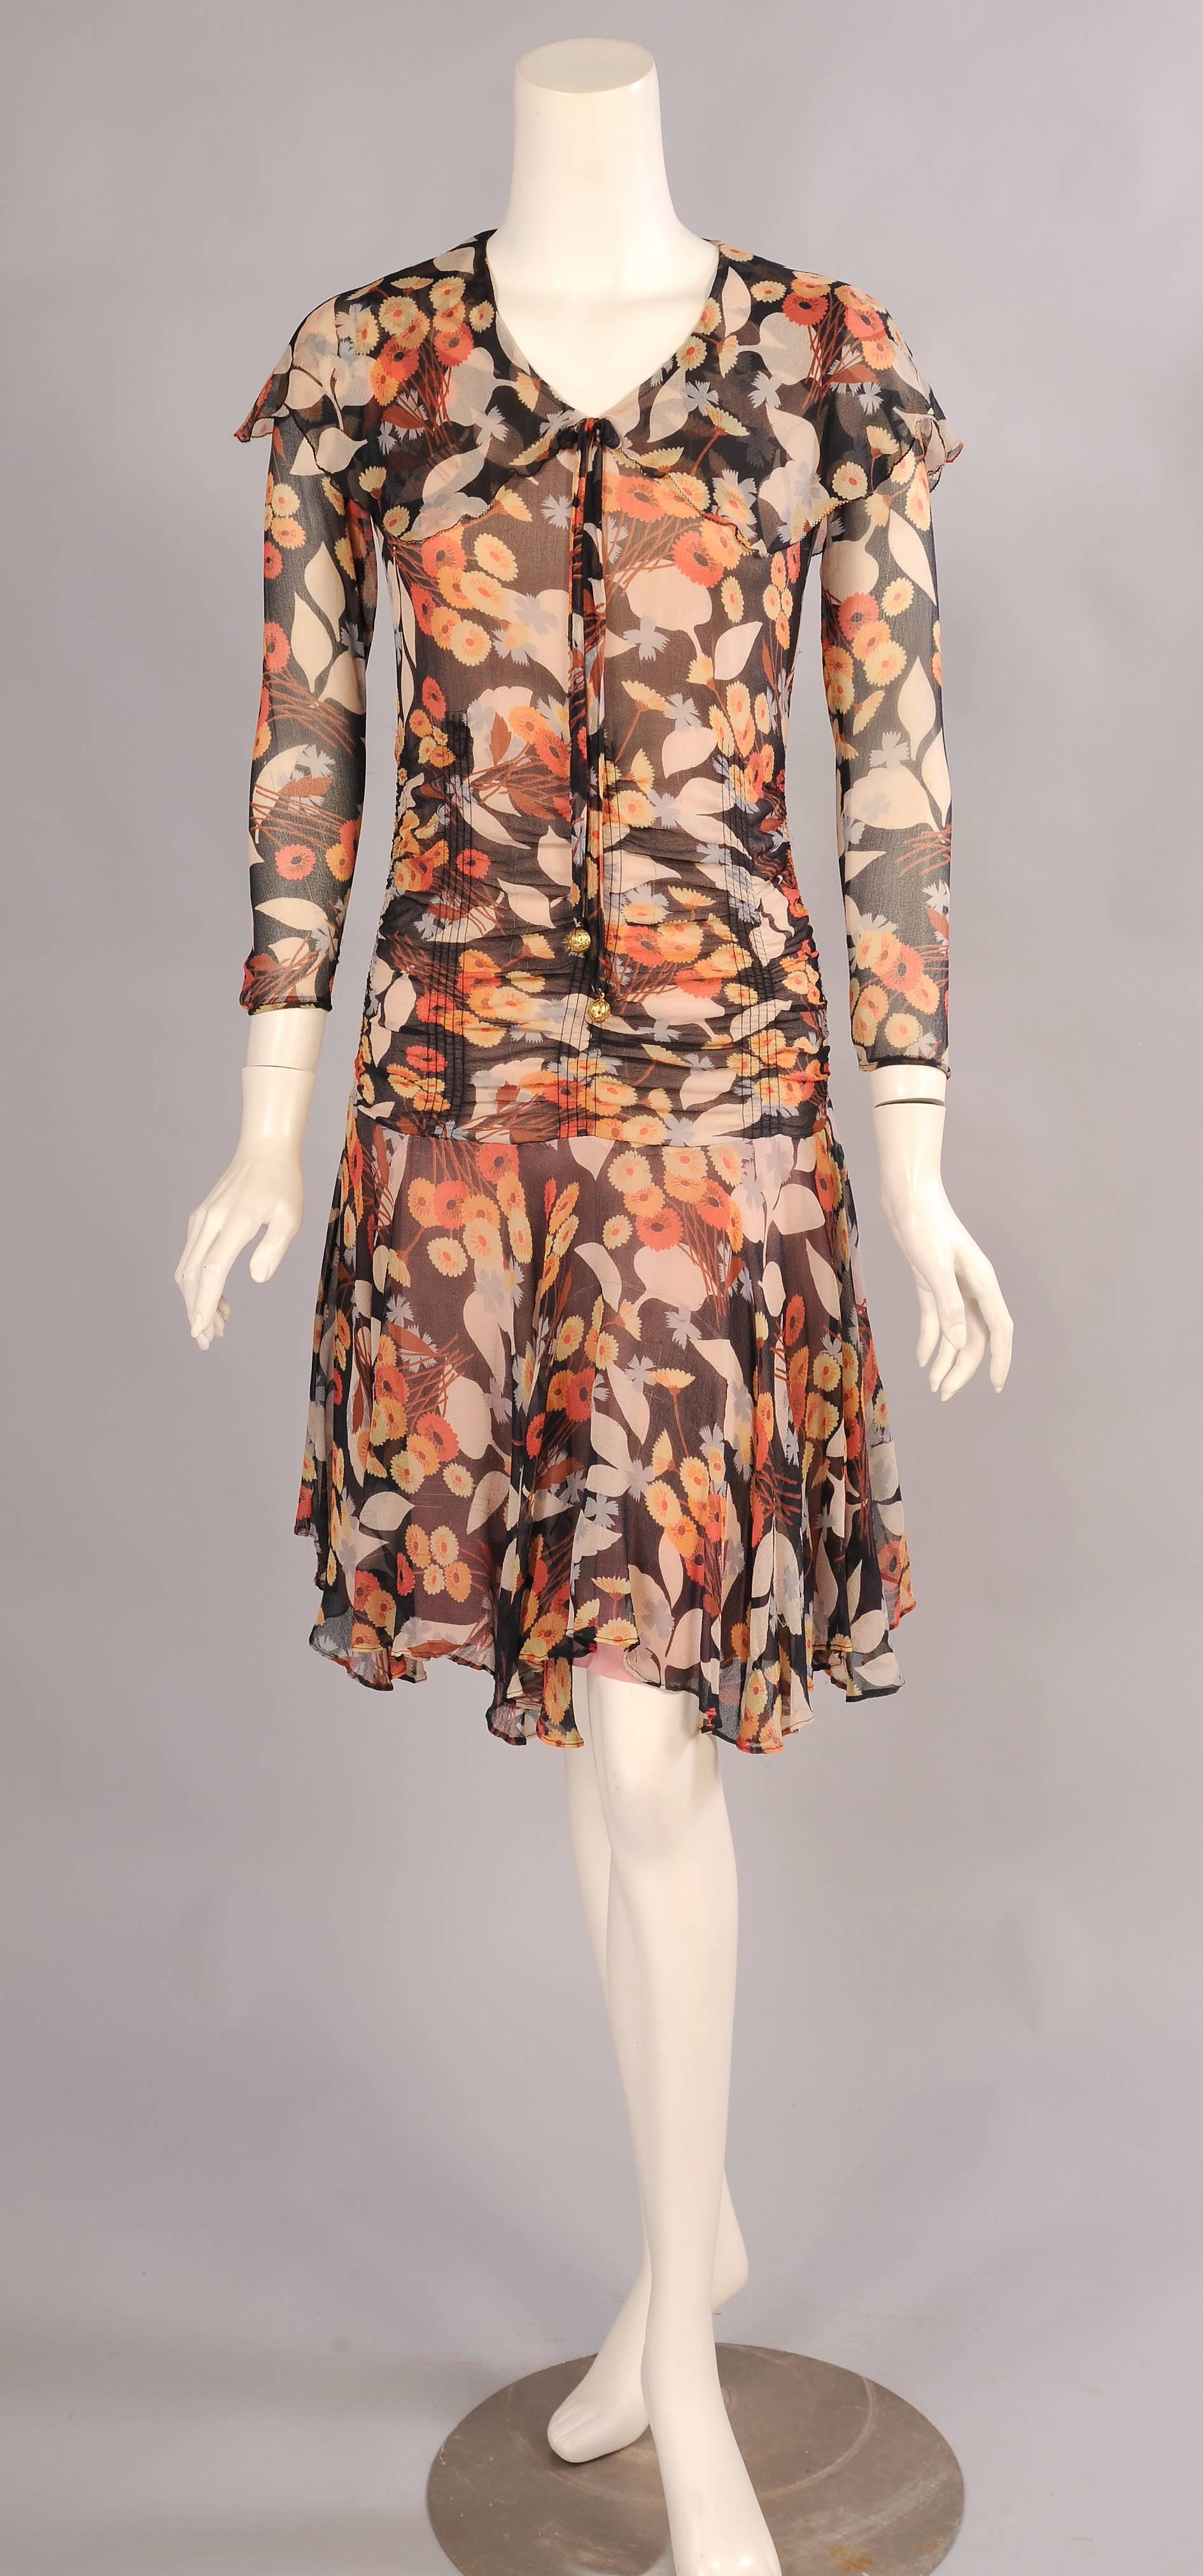 A black silk chiffon is printed with bouquets of orange and yellow flowers as well as a larger scale white and blue floral pattern. The dress has a sailor collar  and a bow with golden beads at the center front. The bodice is shirred over the hips